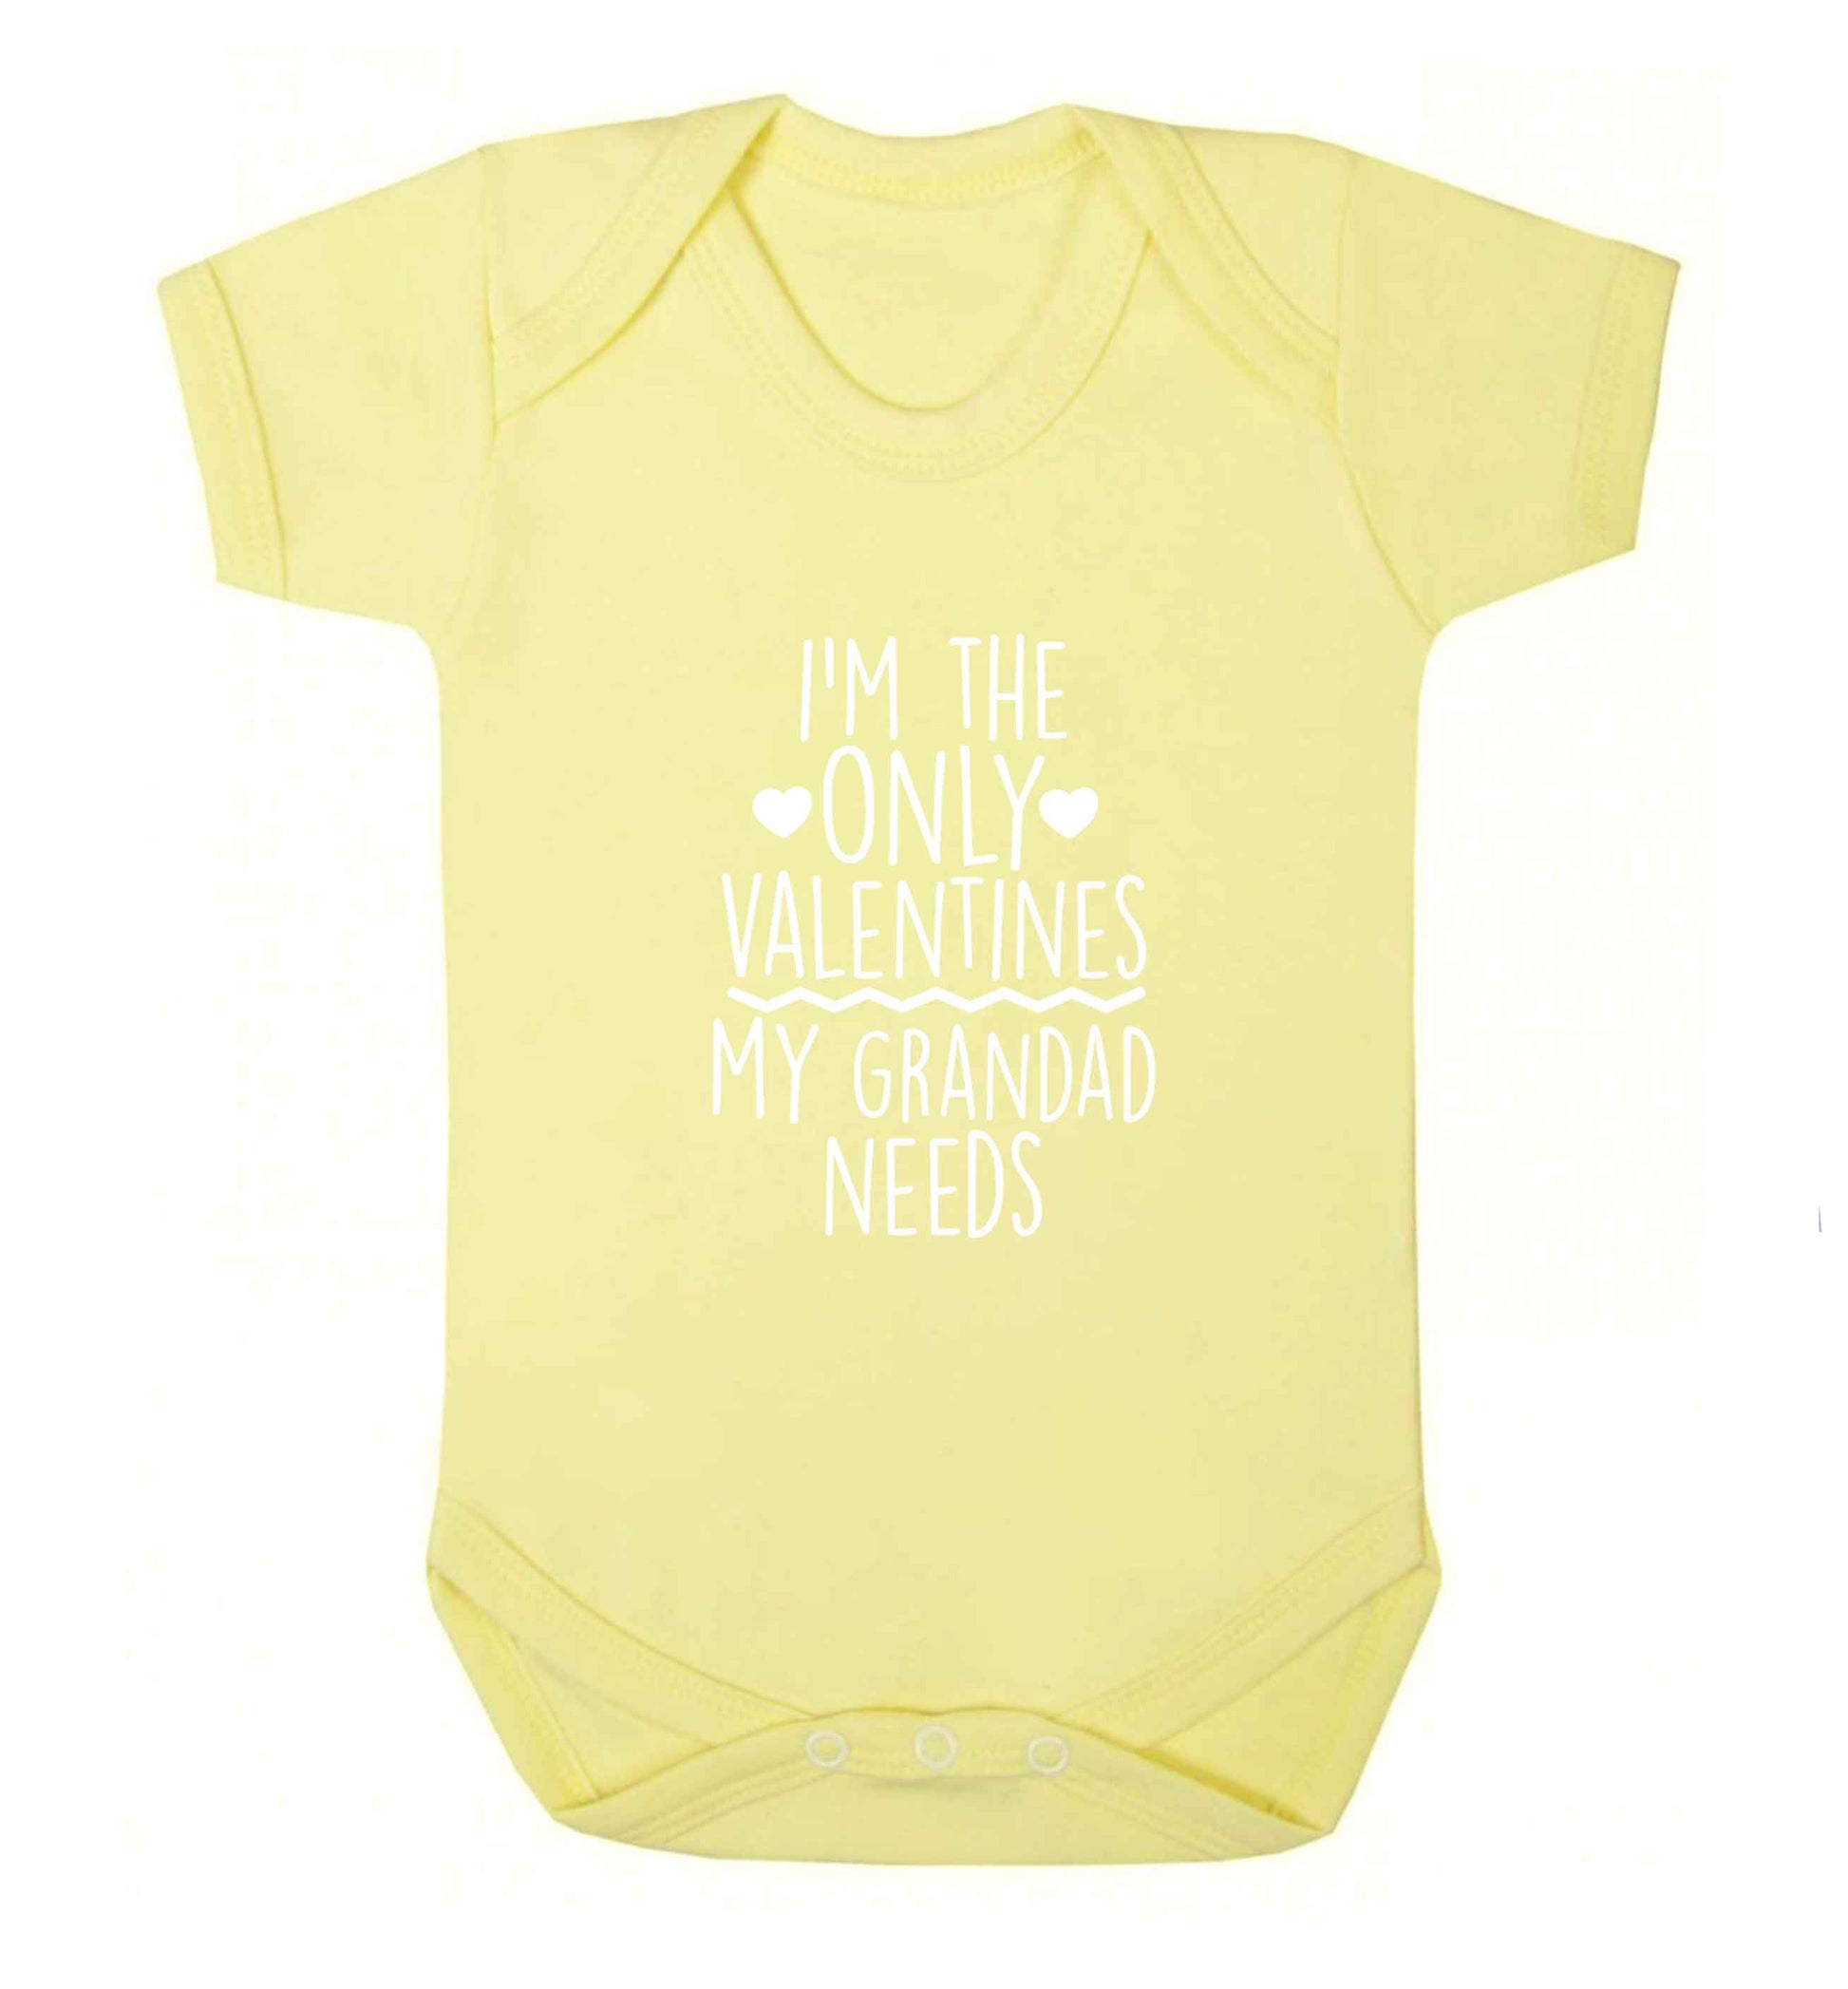 I'm the only valentines my grandad needs baby vest pale yellow 18-24 months